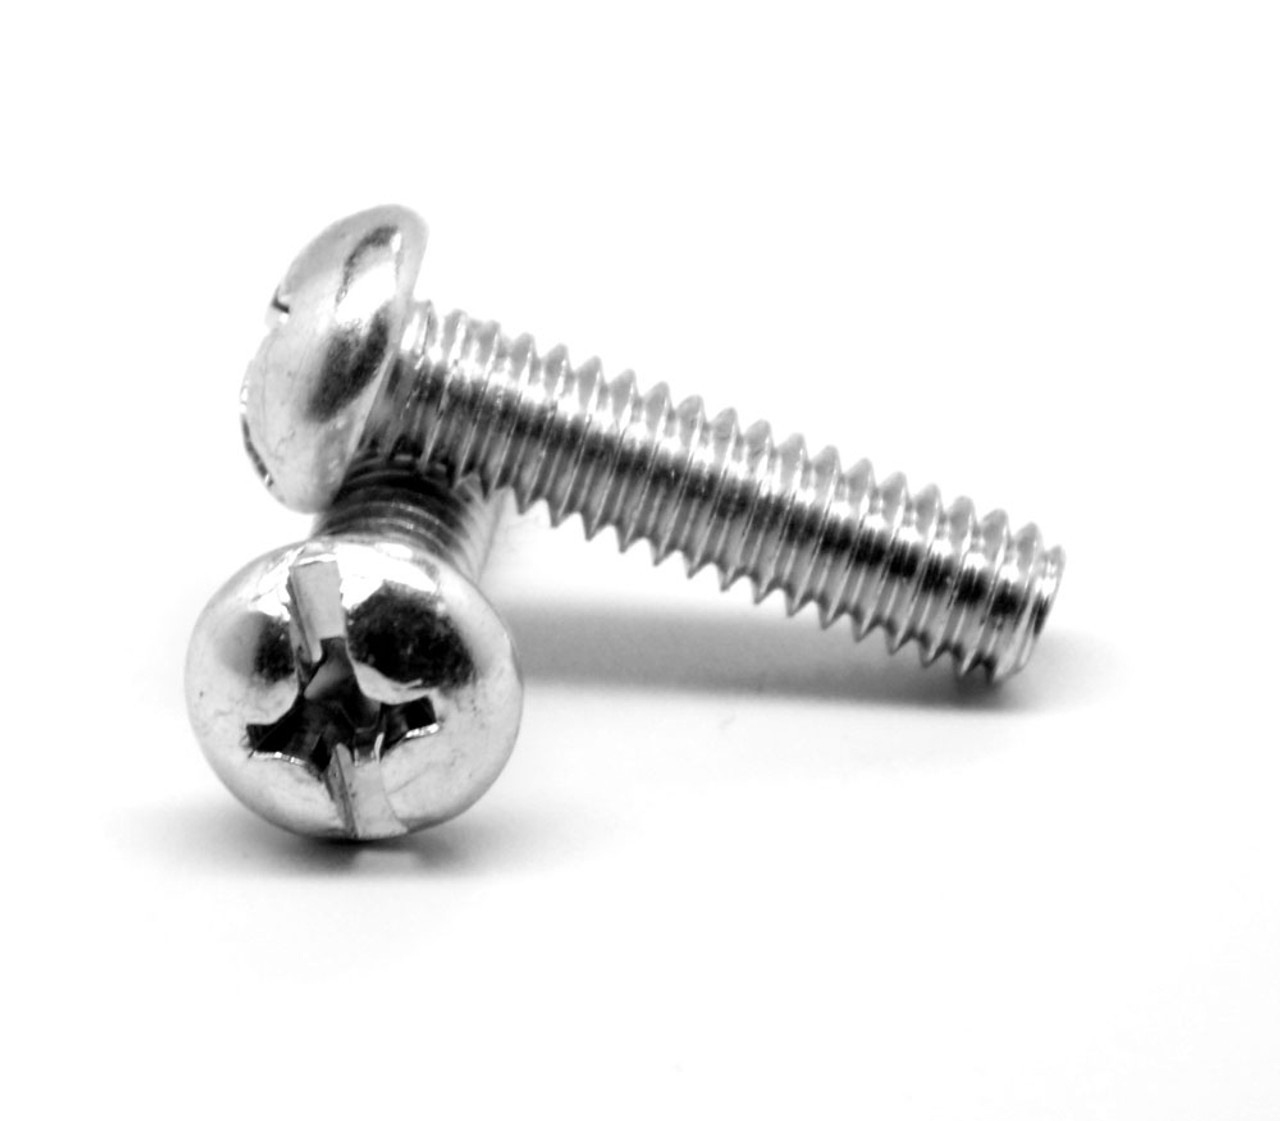 #4-40 x 1/8" (FT) Coarse Thread Machine Screw Combo (Phillips/Slotted) Pan Head Low Carbon Steel Zinc Plated